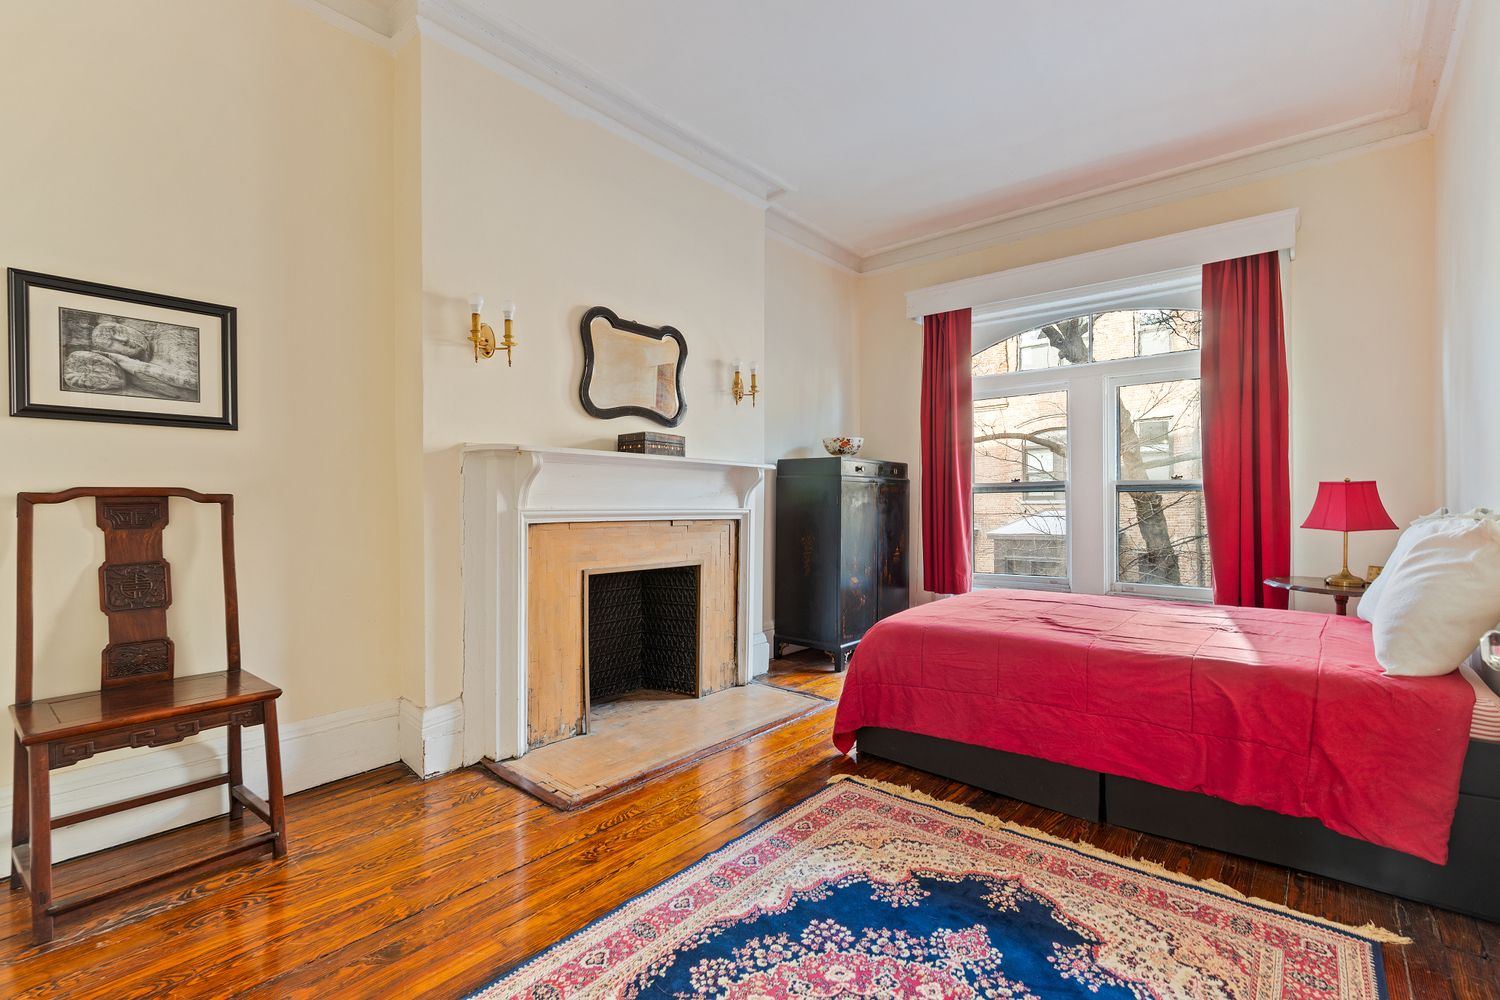 bedroom with original wood floors and a white painted mantel